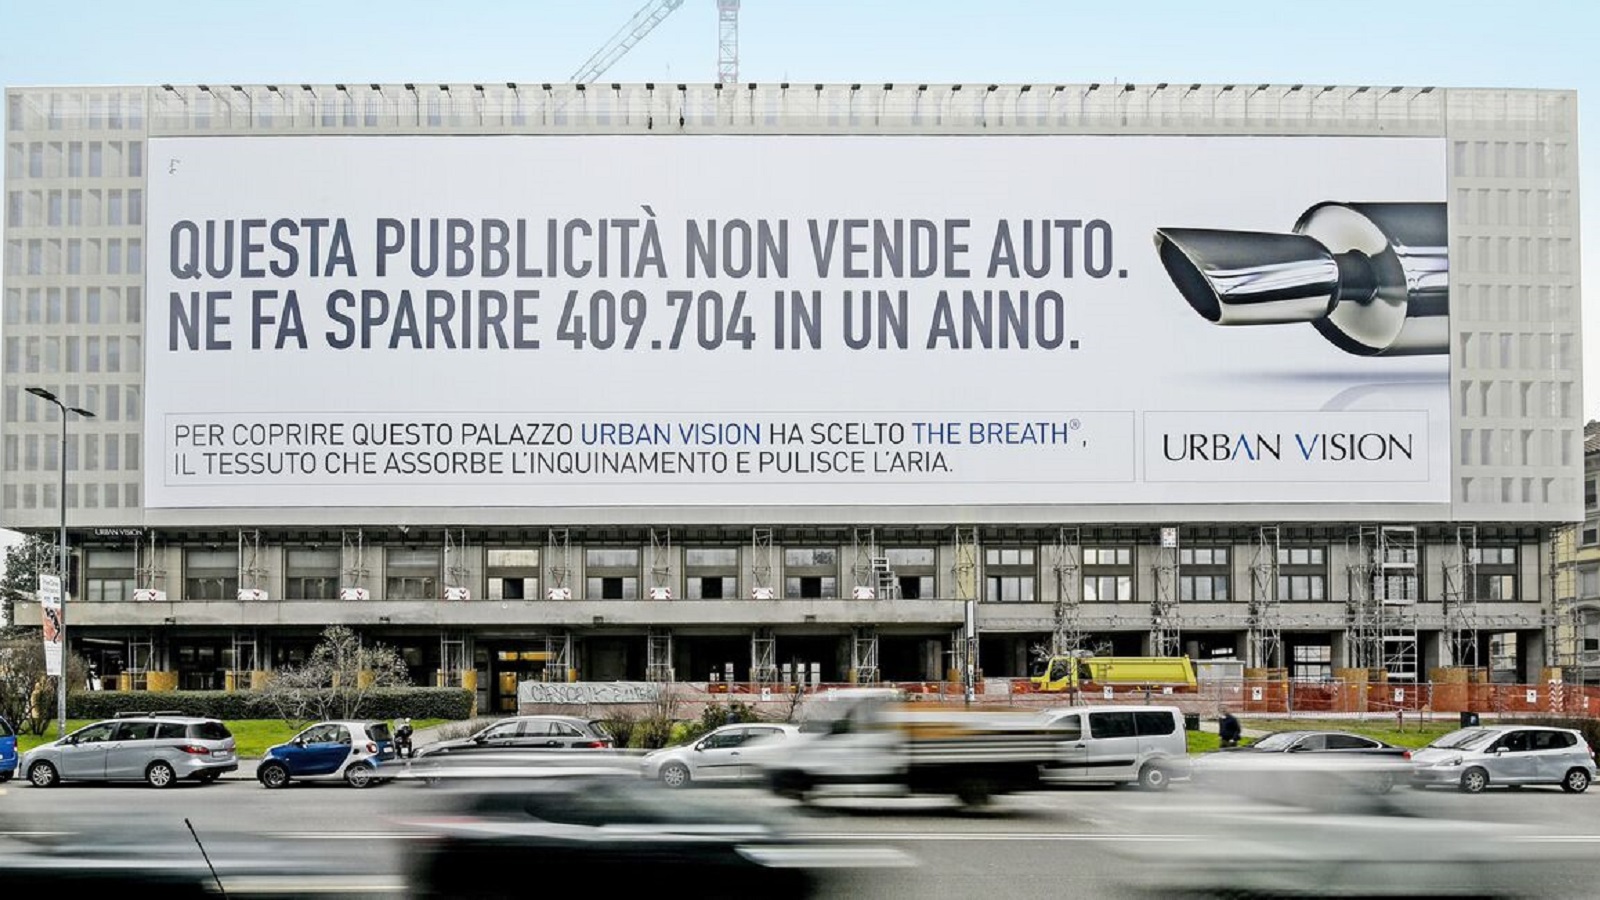 Reducing Air Pollution Could Be as Simple as Putting Up Billboards Around the City